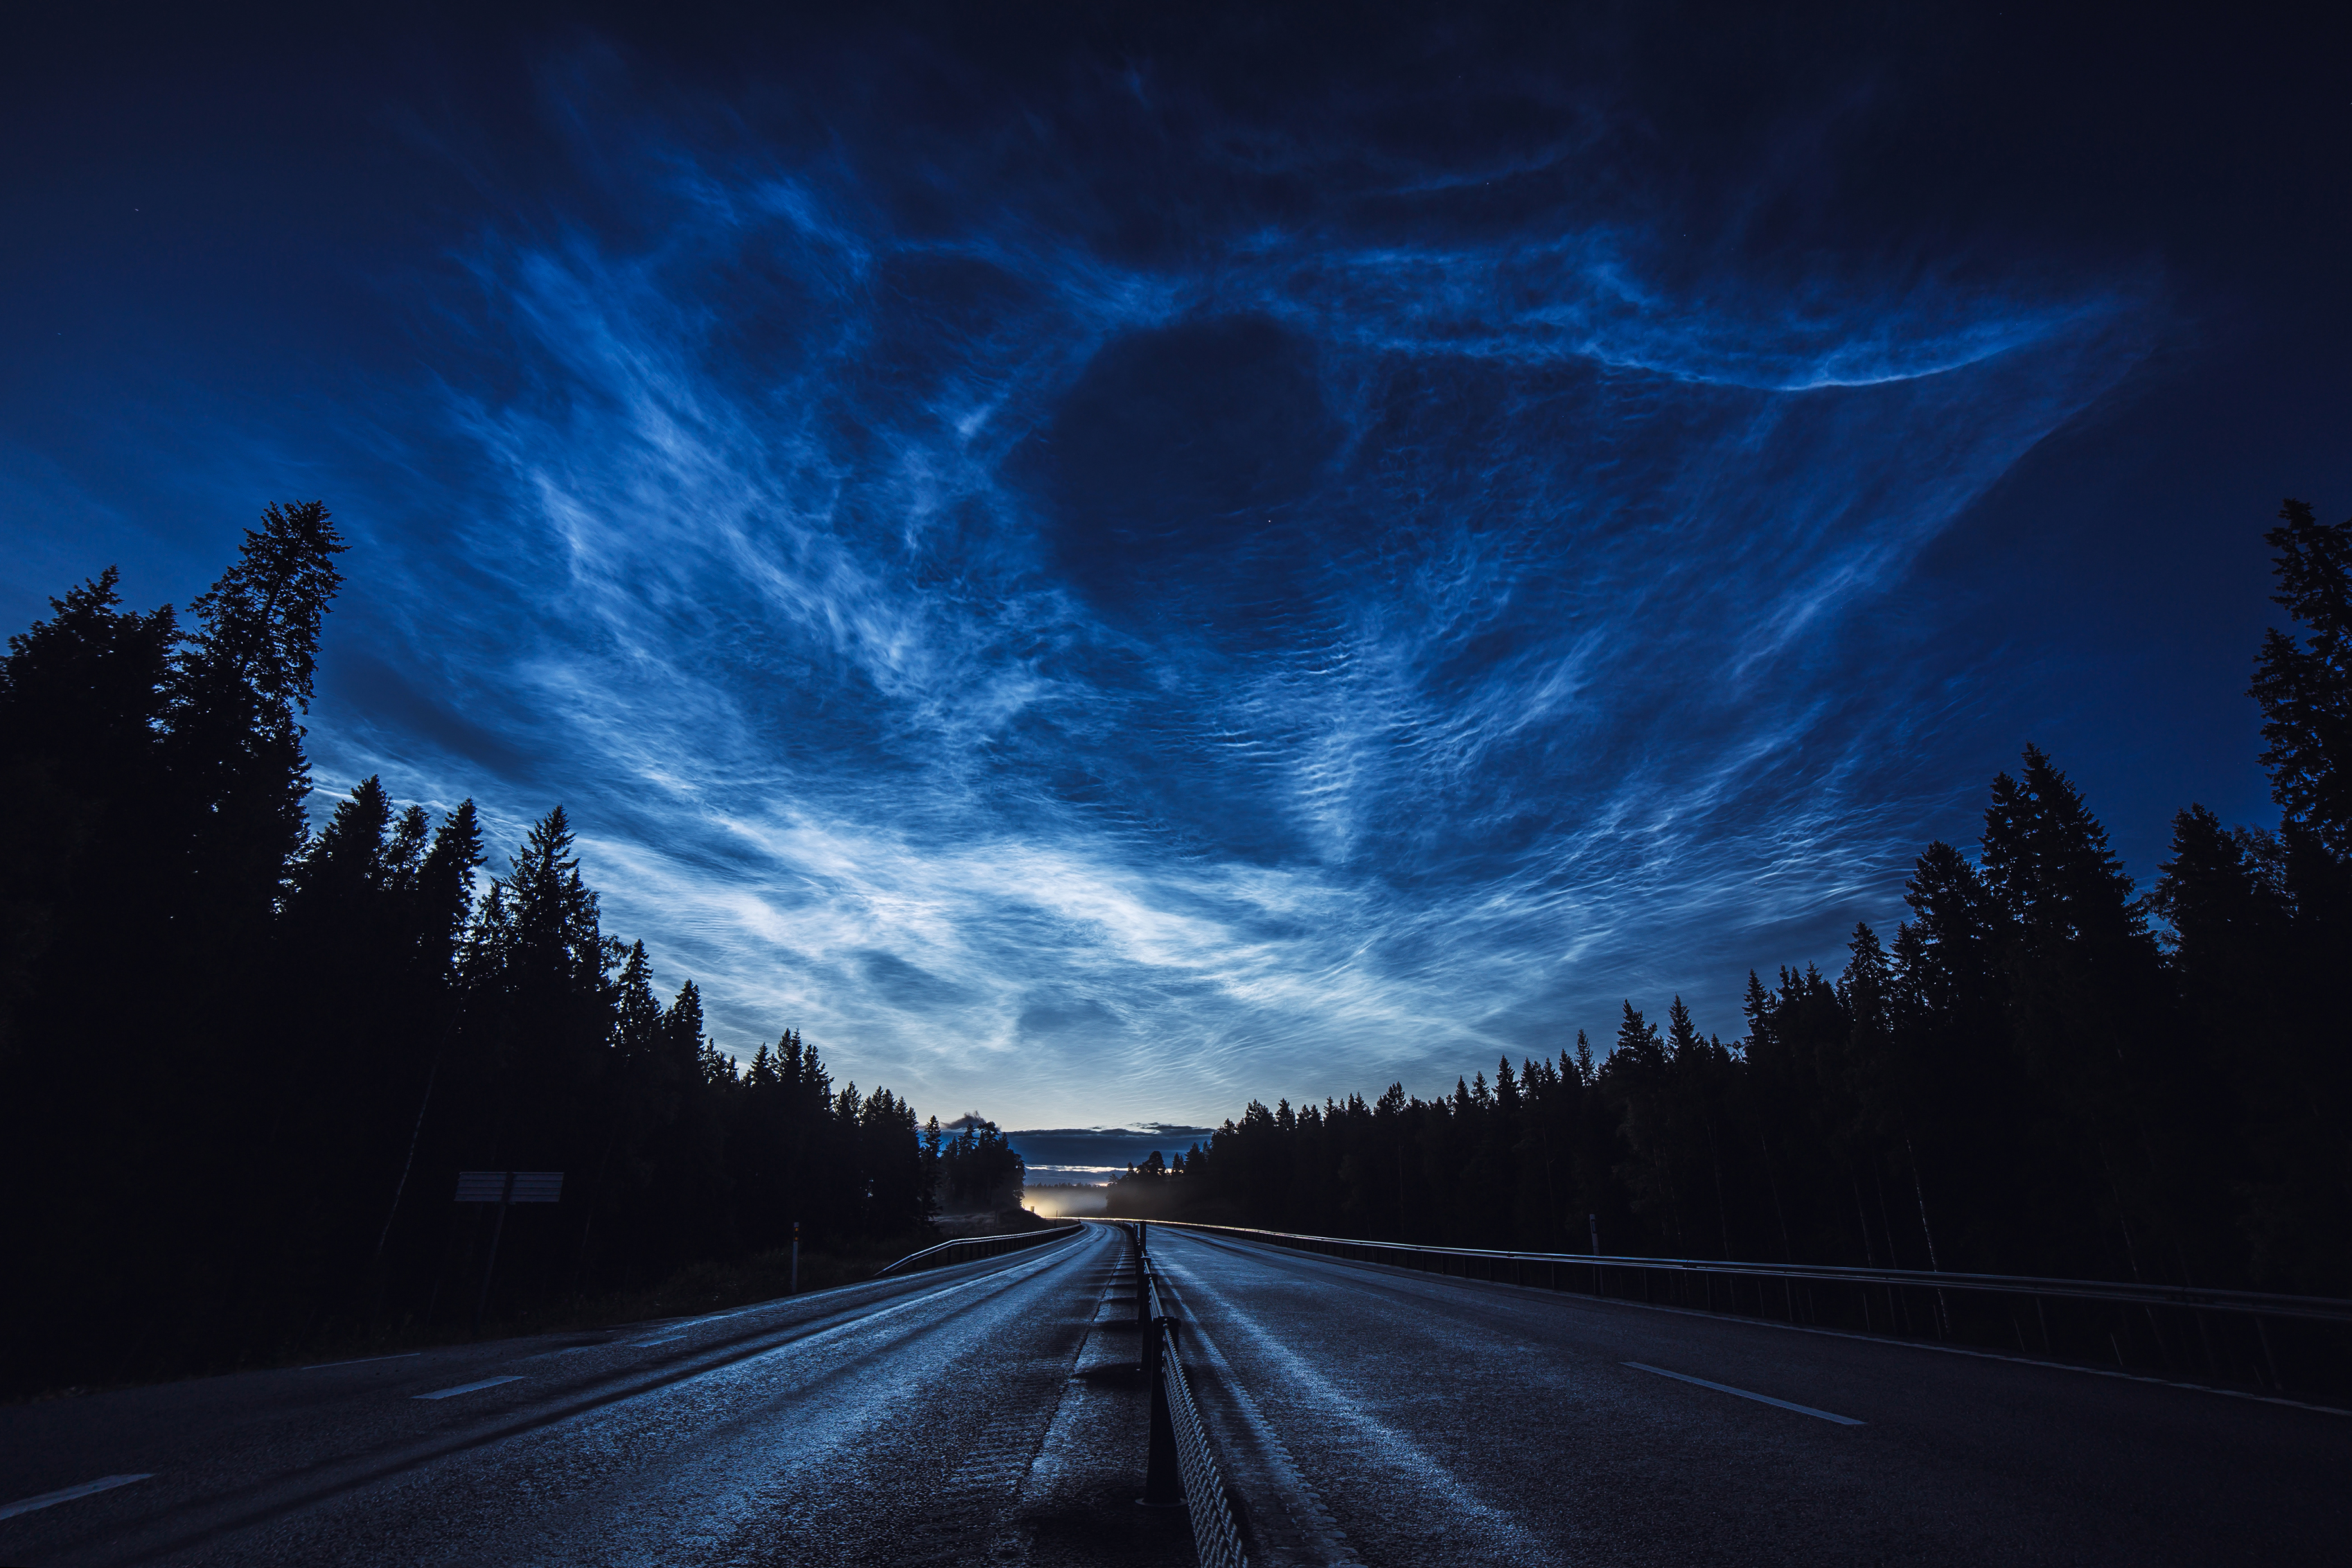 General 3661x2441 nature landscape long exposure night trees forest clouds road frost mist Sweden blue